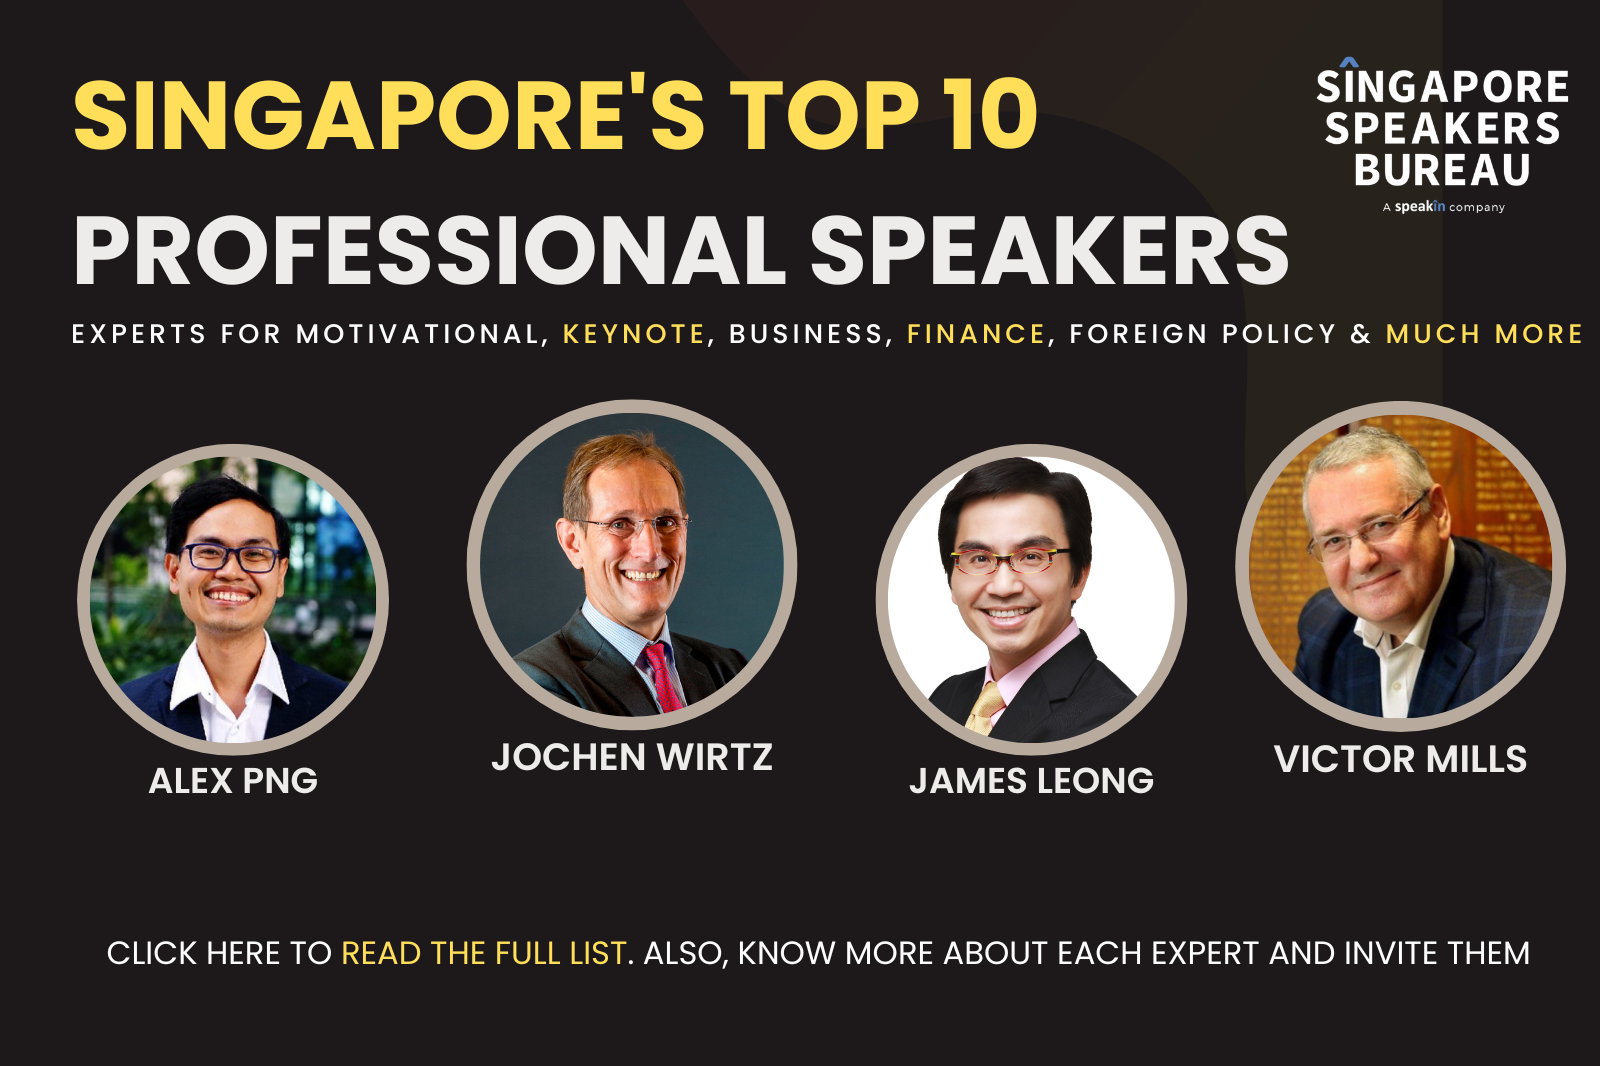 Singapore's Top 10 Professional Speakers - Motivational, Keynote & Business